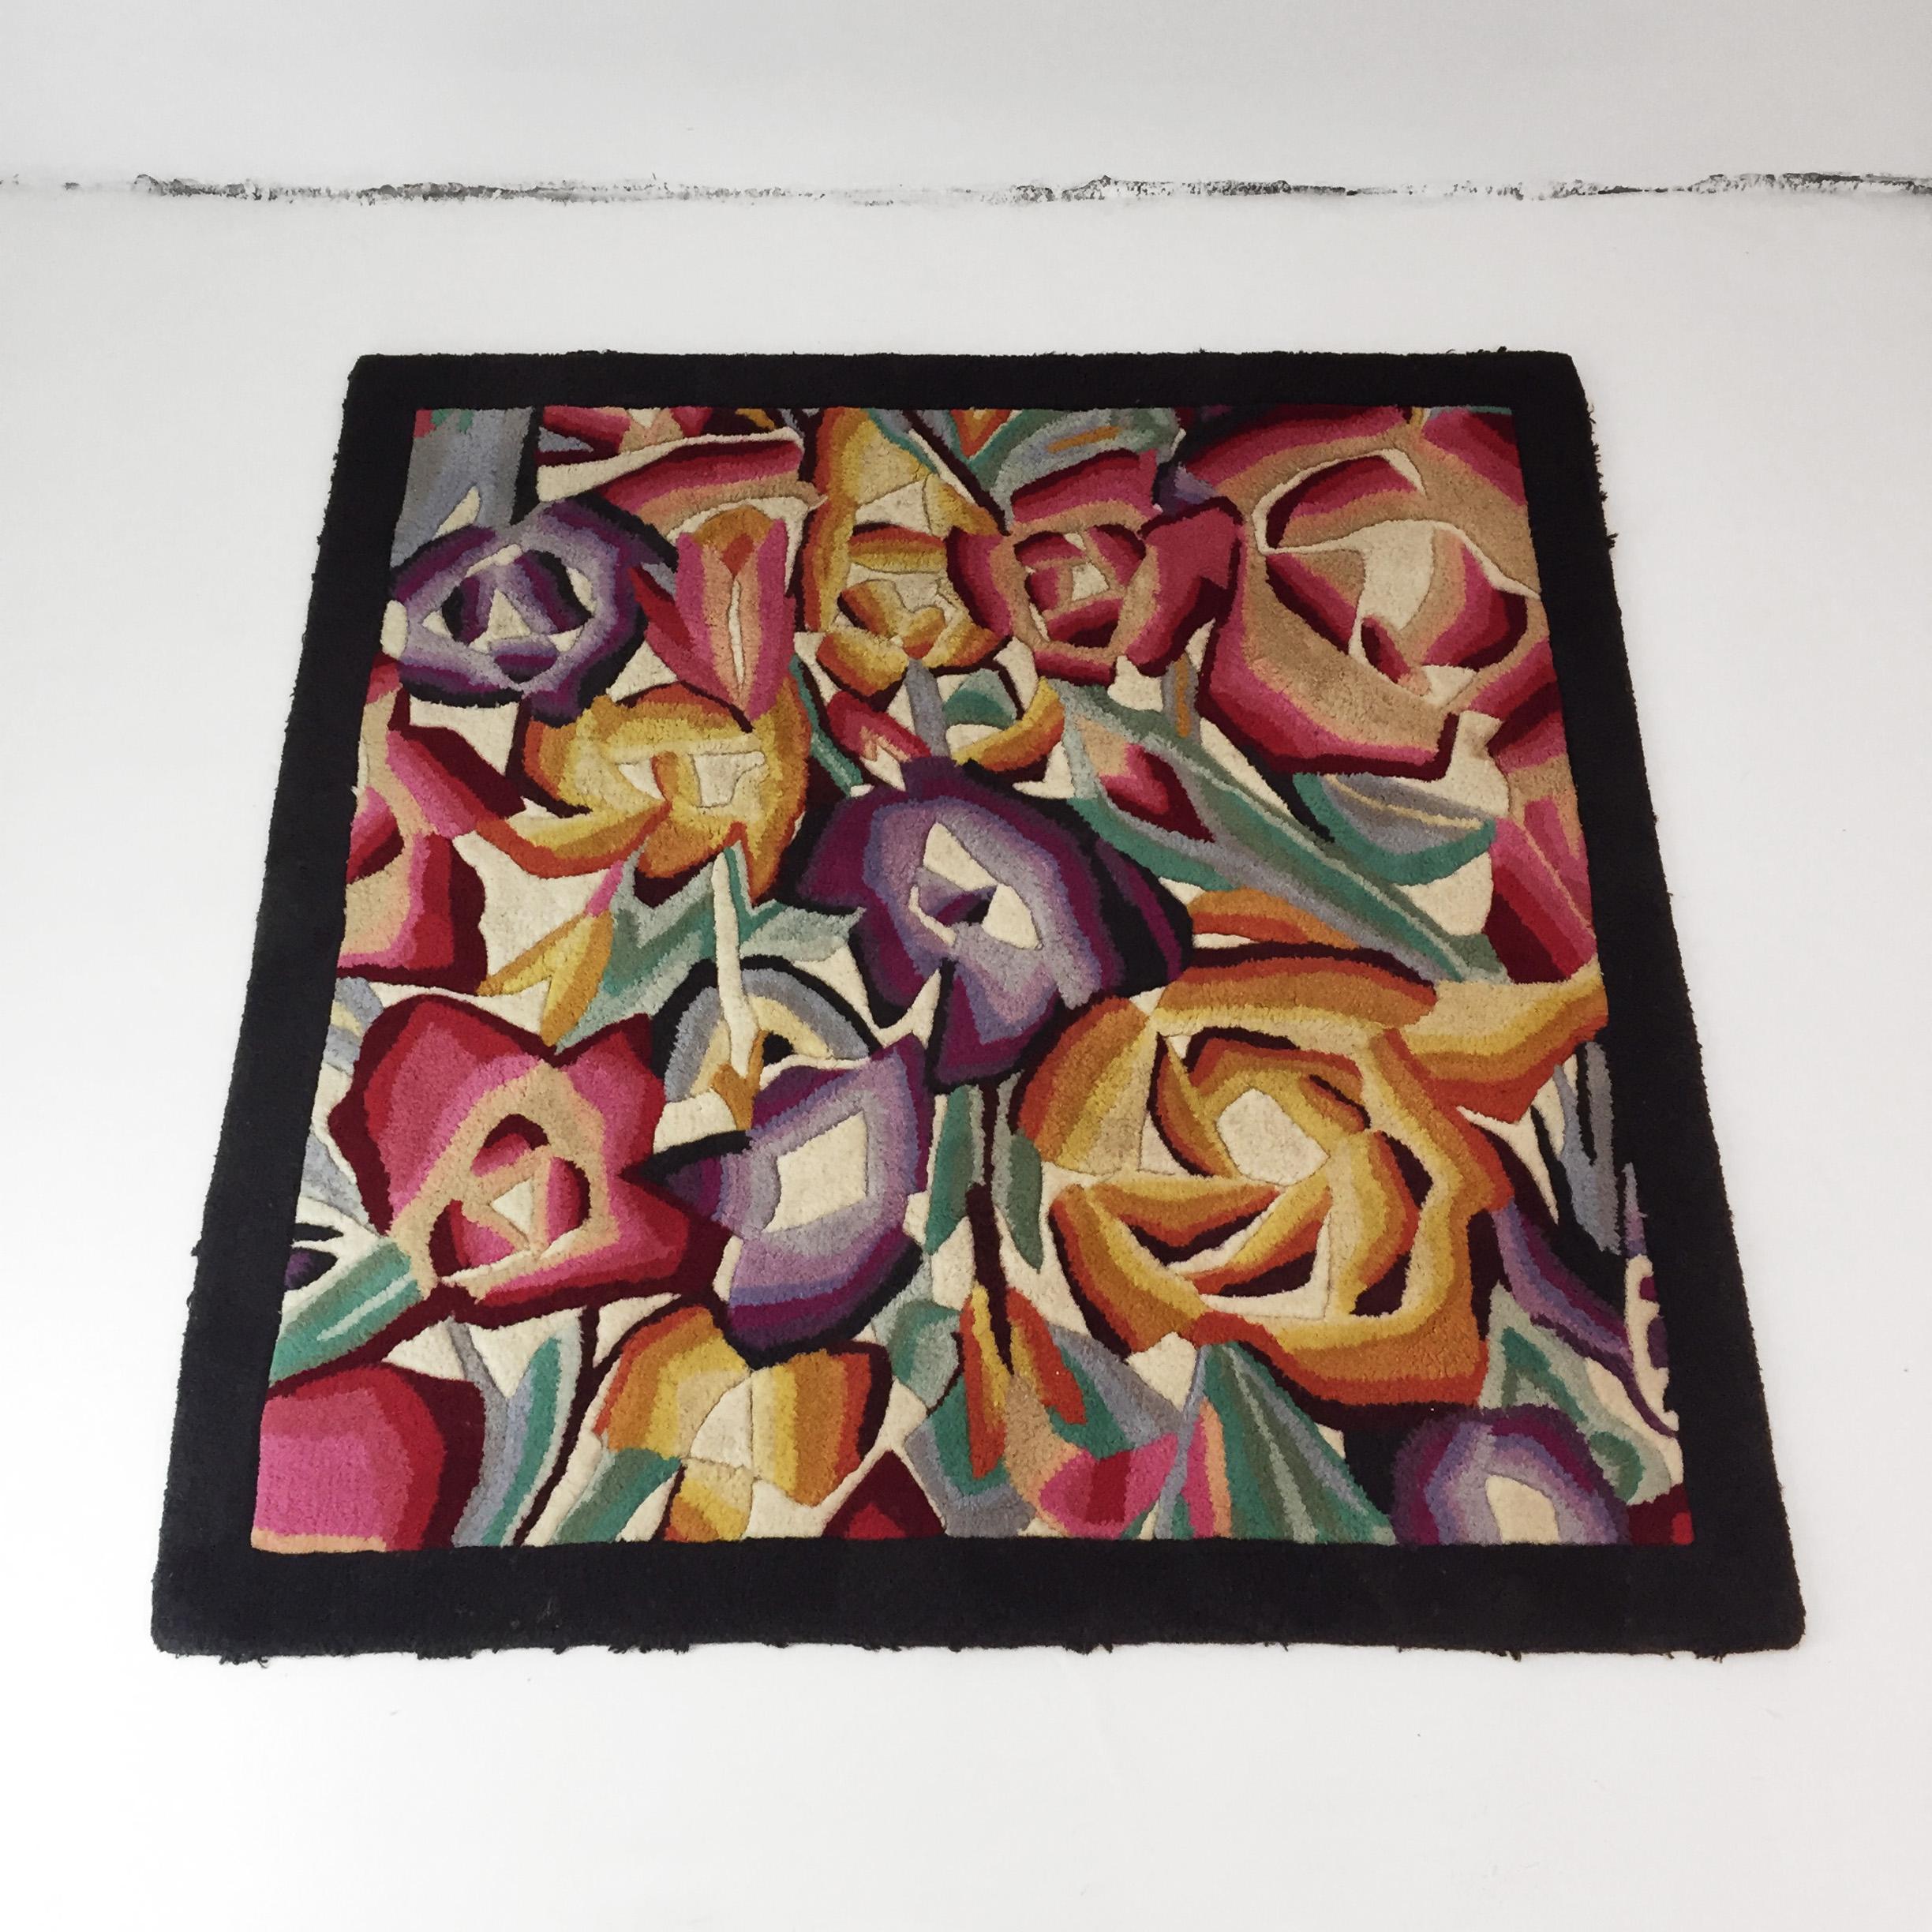 Beautiful flowers square rug by Missoni Home. Cubist roses and other flowers of thick wool weave composing a flower synthesis in vibrant colours framed by the black wool border. Imported from Italy. Original Missoni label lost on transportation,